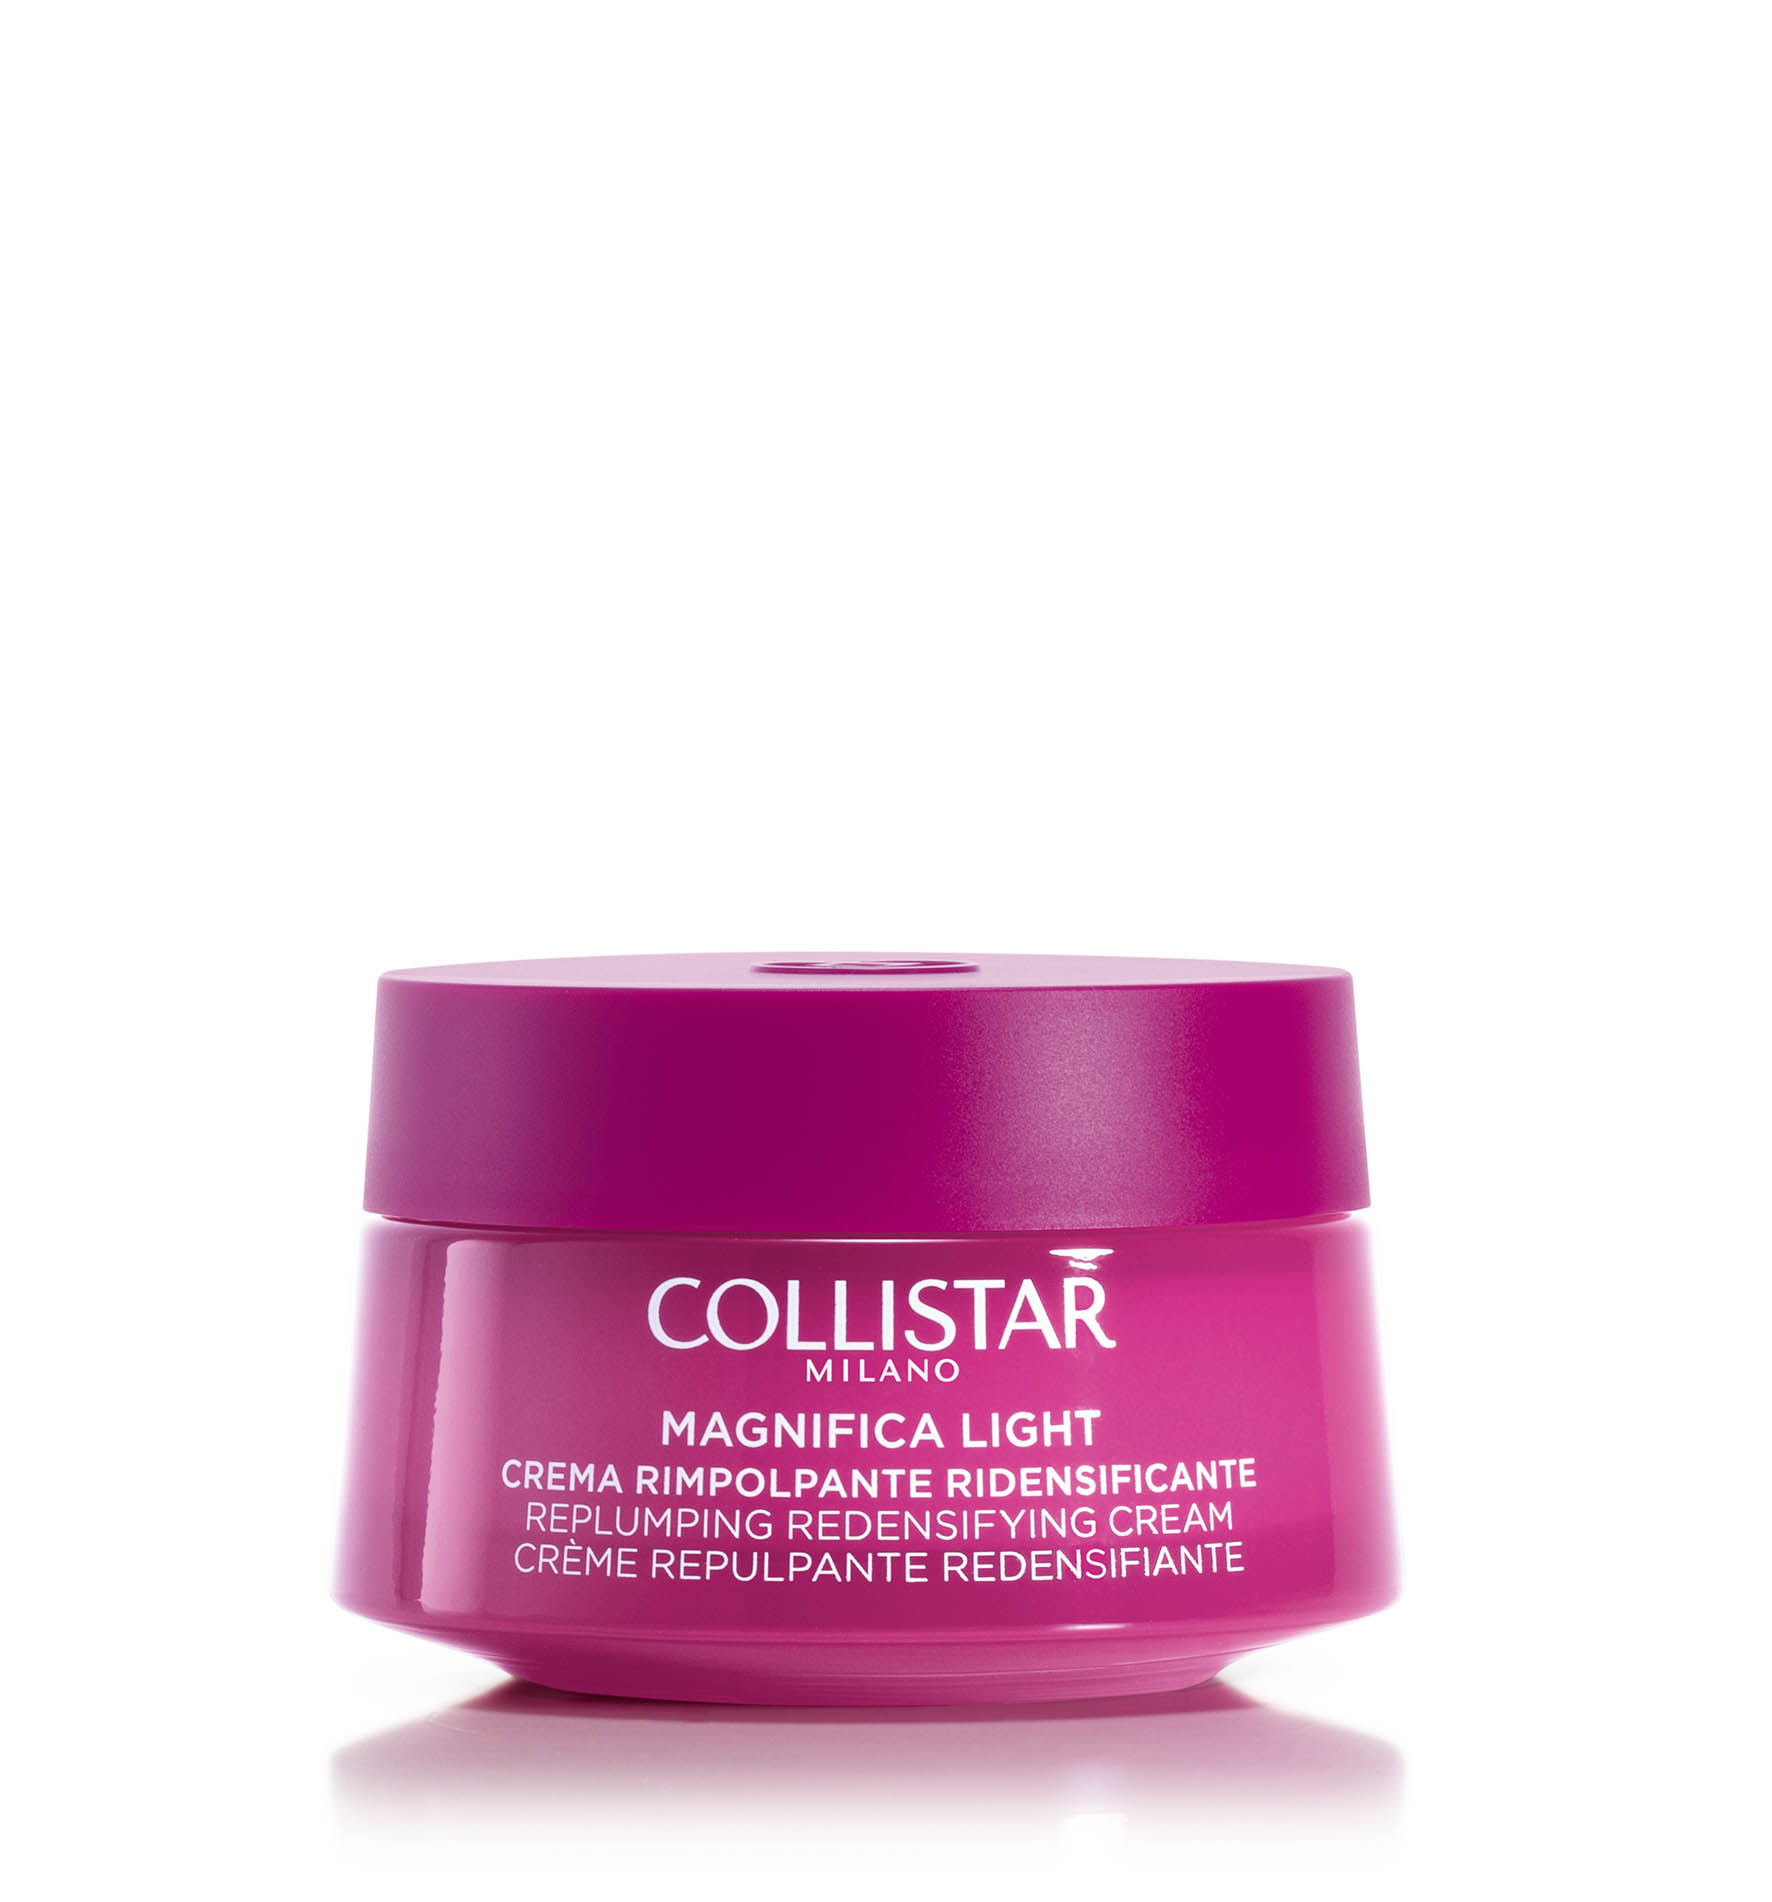 MAGNIFICA LIGHT REPLUMPING REDENSIFYING CREAM FACE AND NECK - Magnifica | Collistar - Shop Online Ufficiale